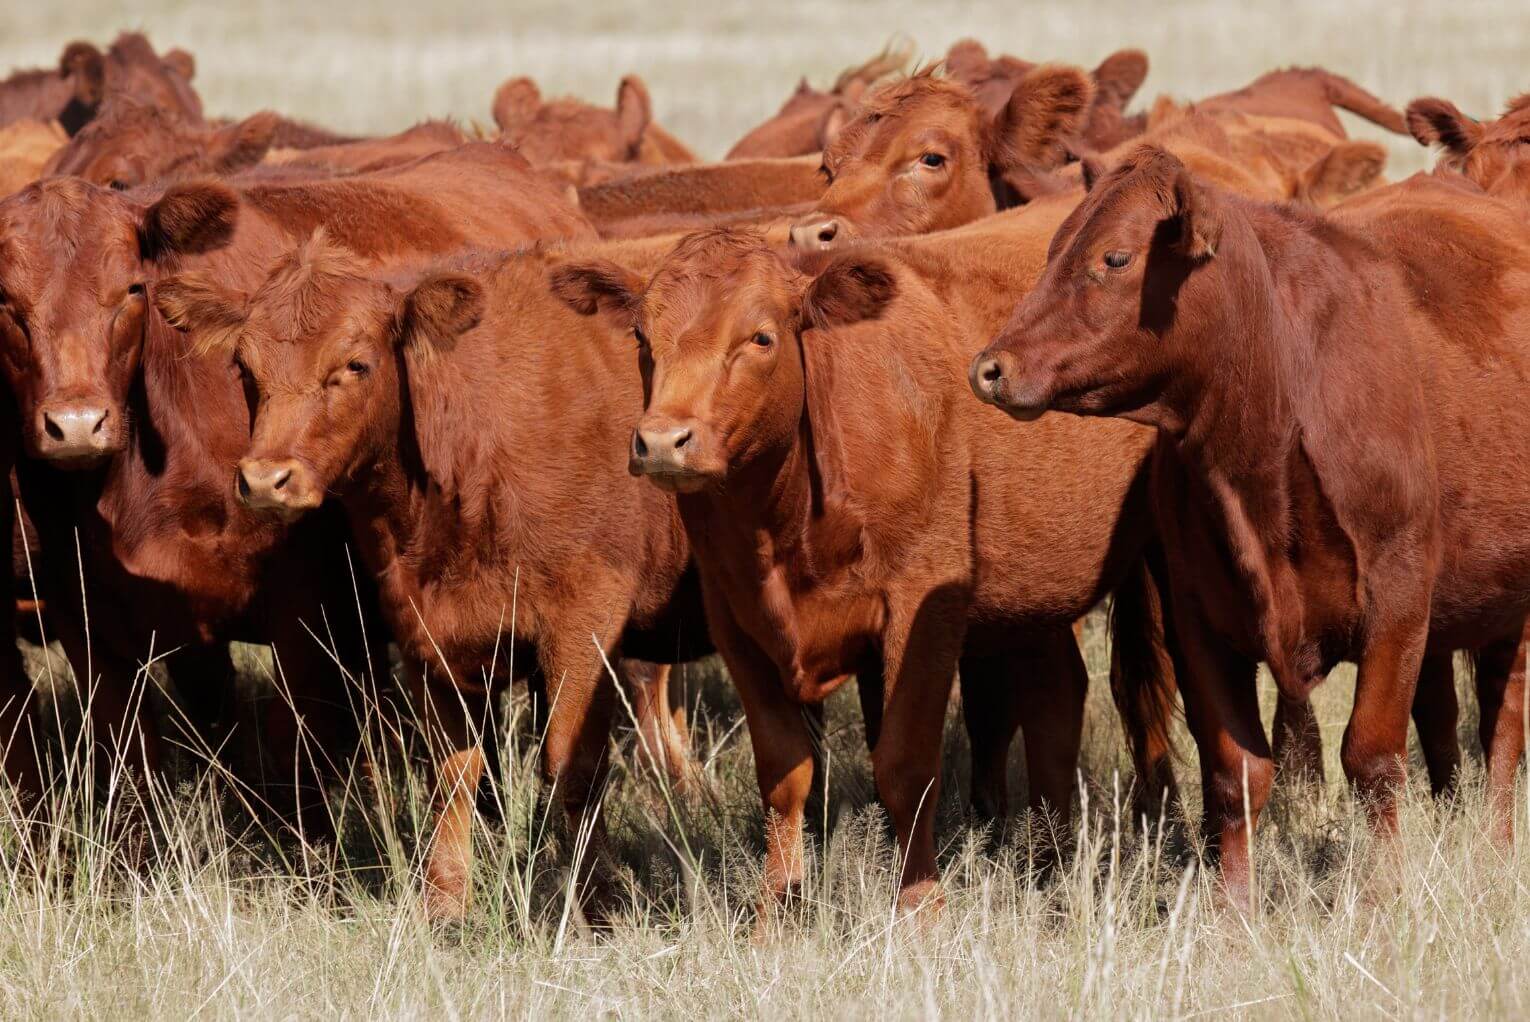 Are The Red Heifers a Sign of the End Times?